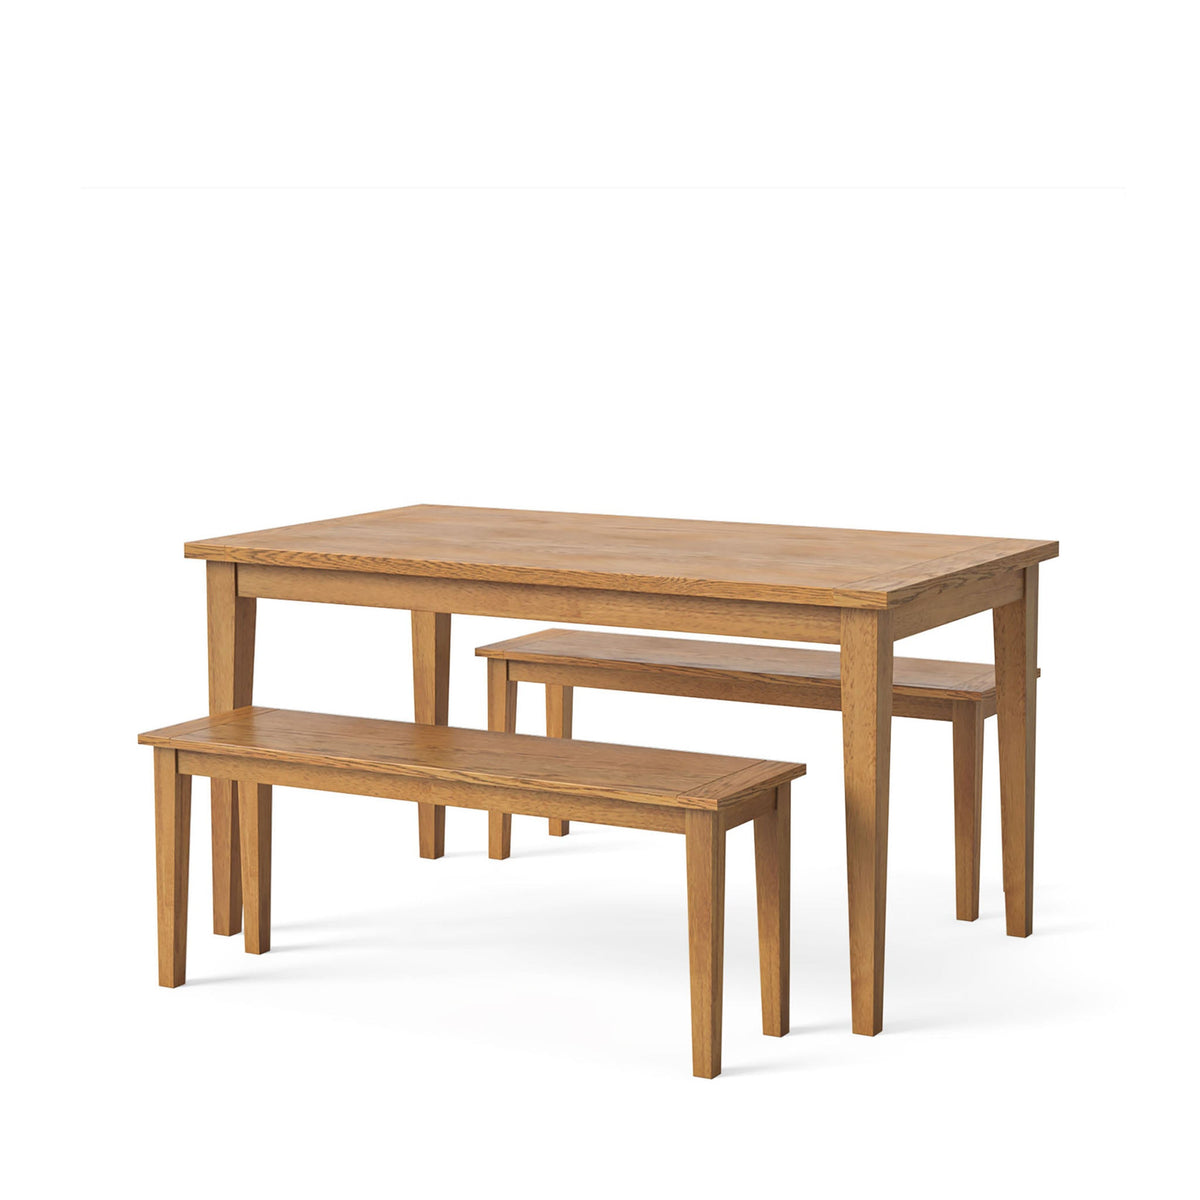 Fran Oak 1.2m Dining Table Set with 2 Wooden Dining Benches